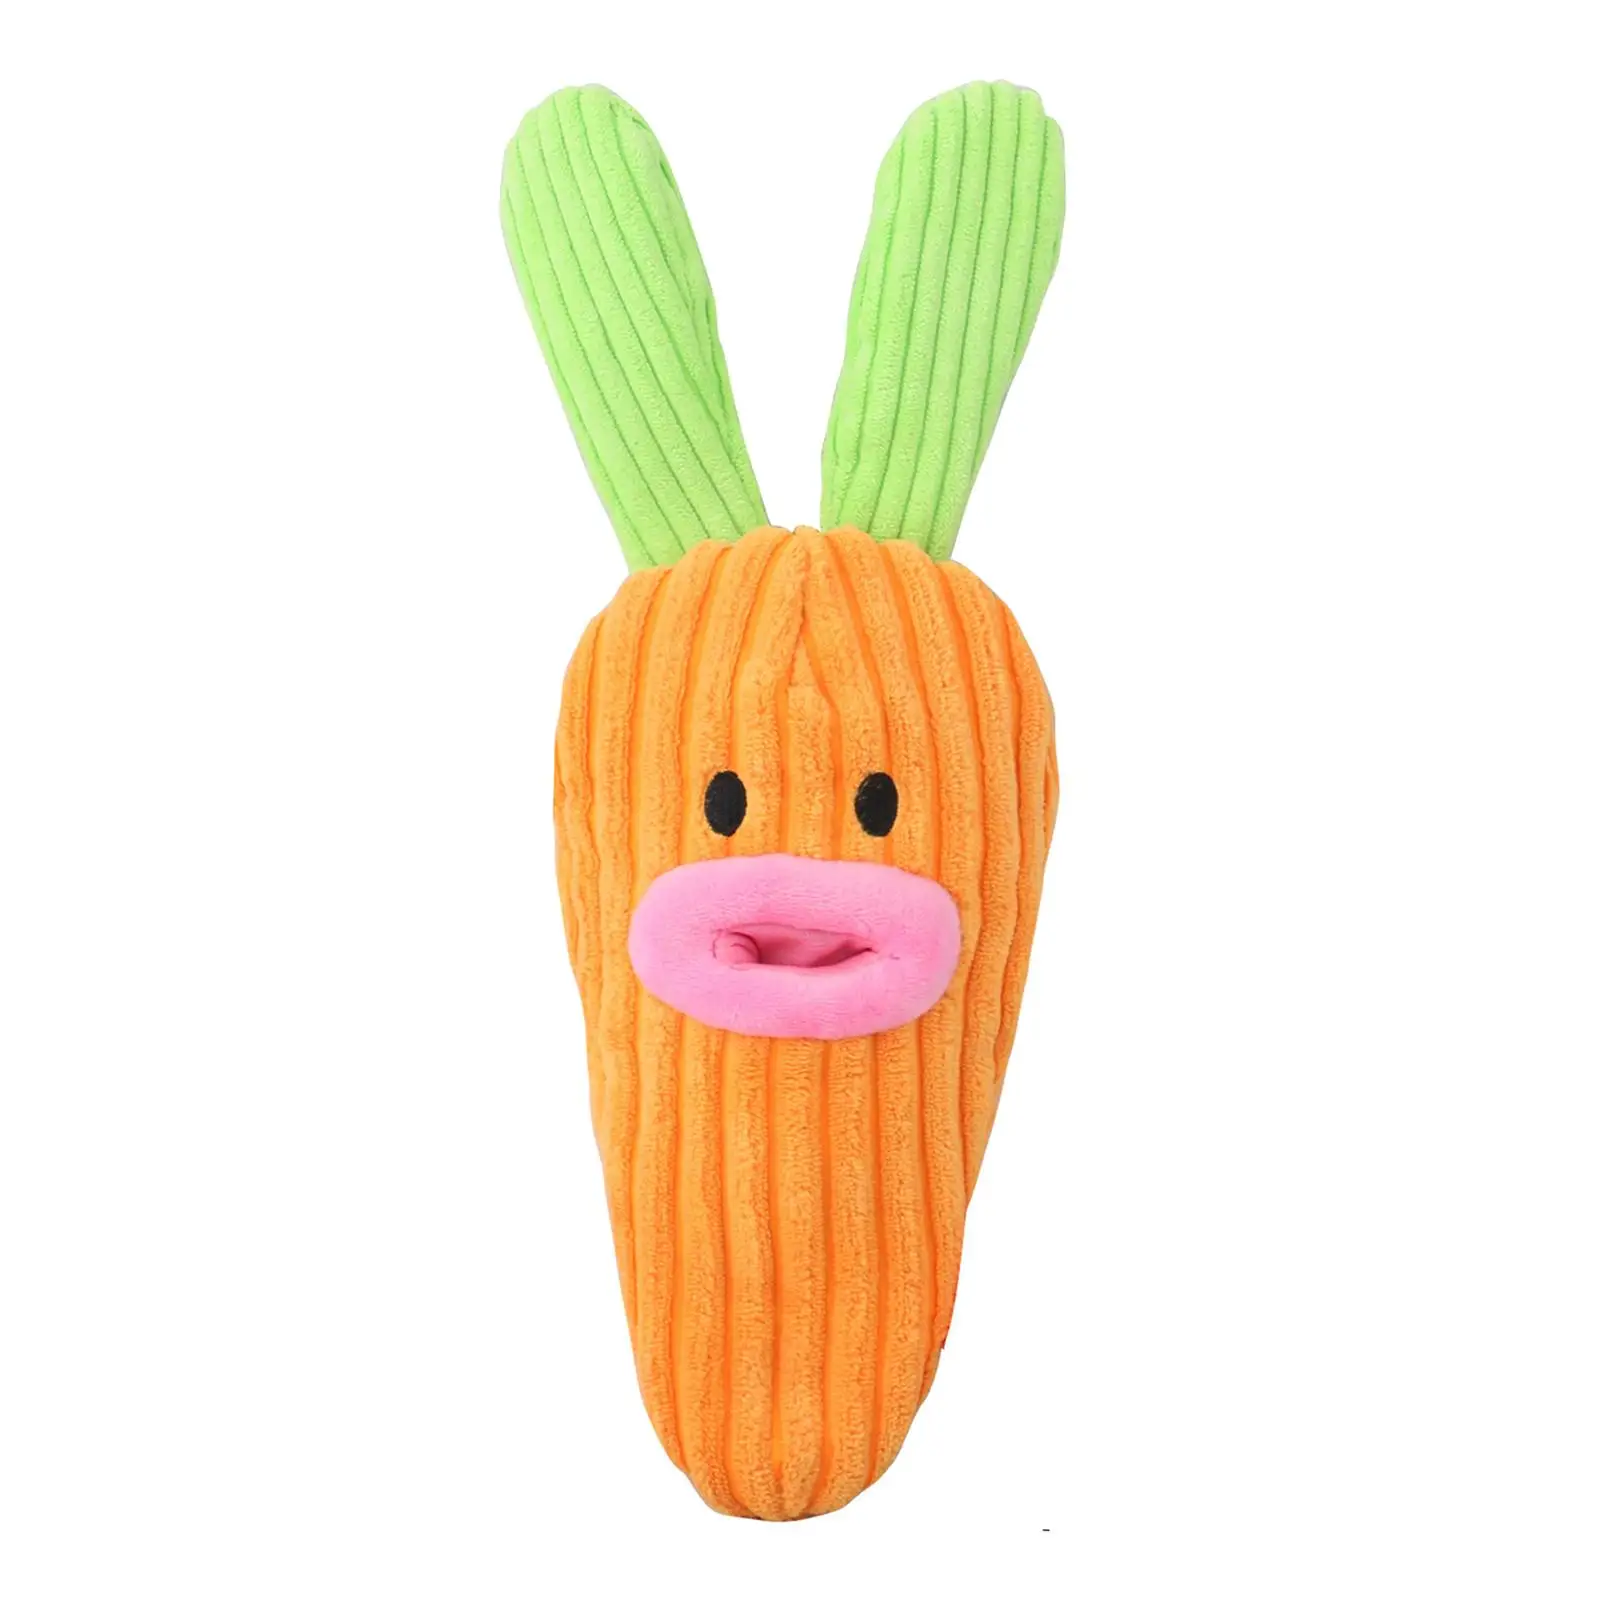 Carrot Rabbit Doll Interactive Durable with Squeaker Food Leakage Dog Chewing Toy for Small Puppy and Medium Dogs Pets Supplies